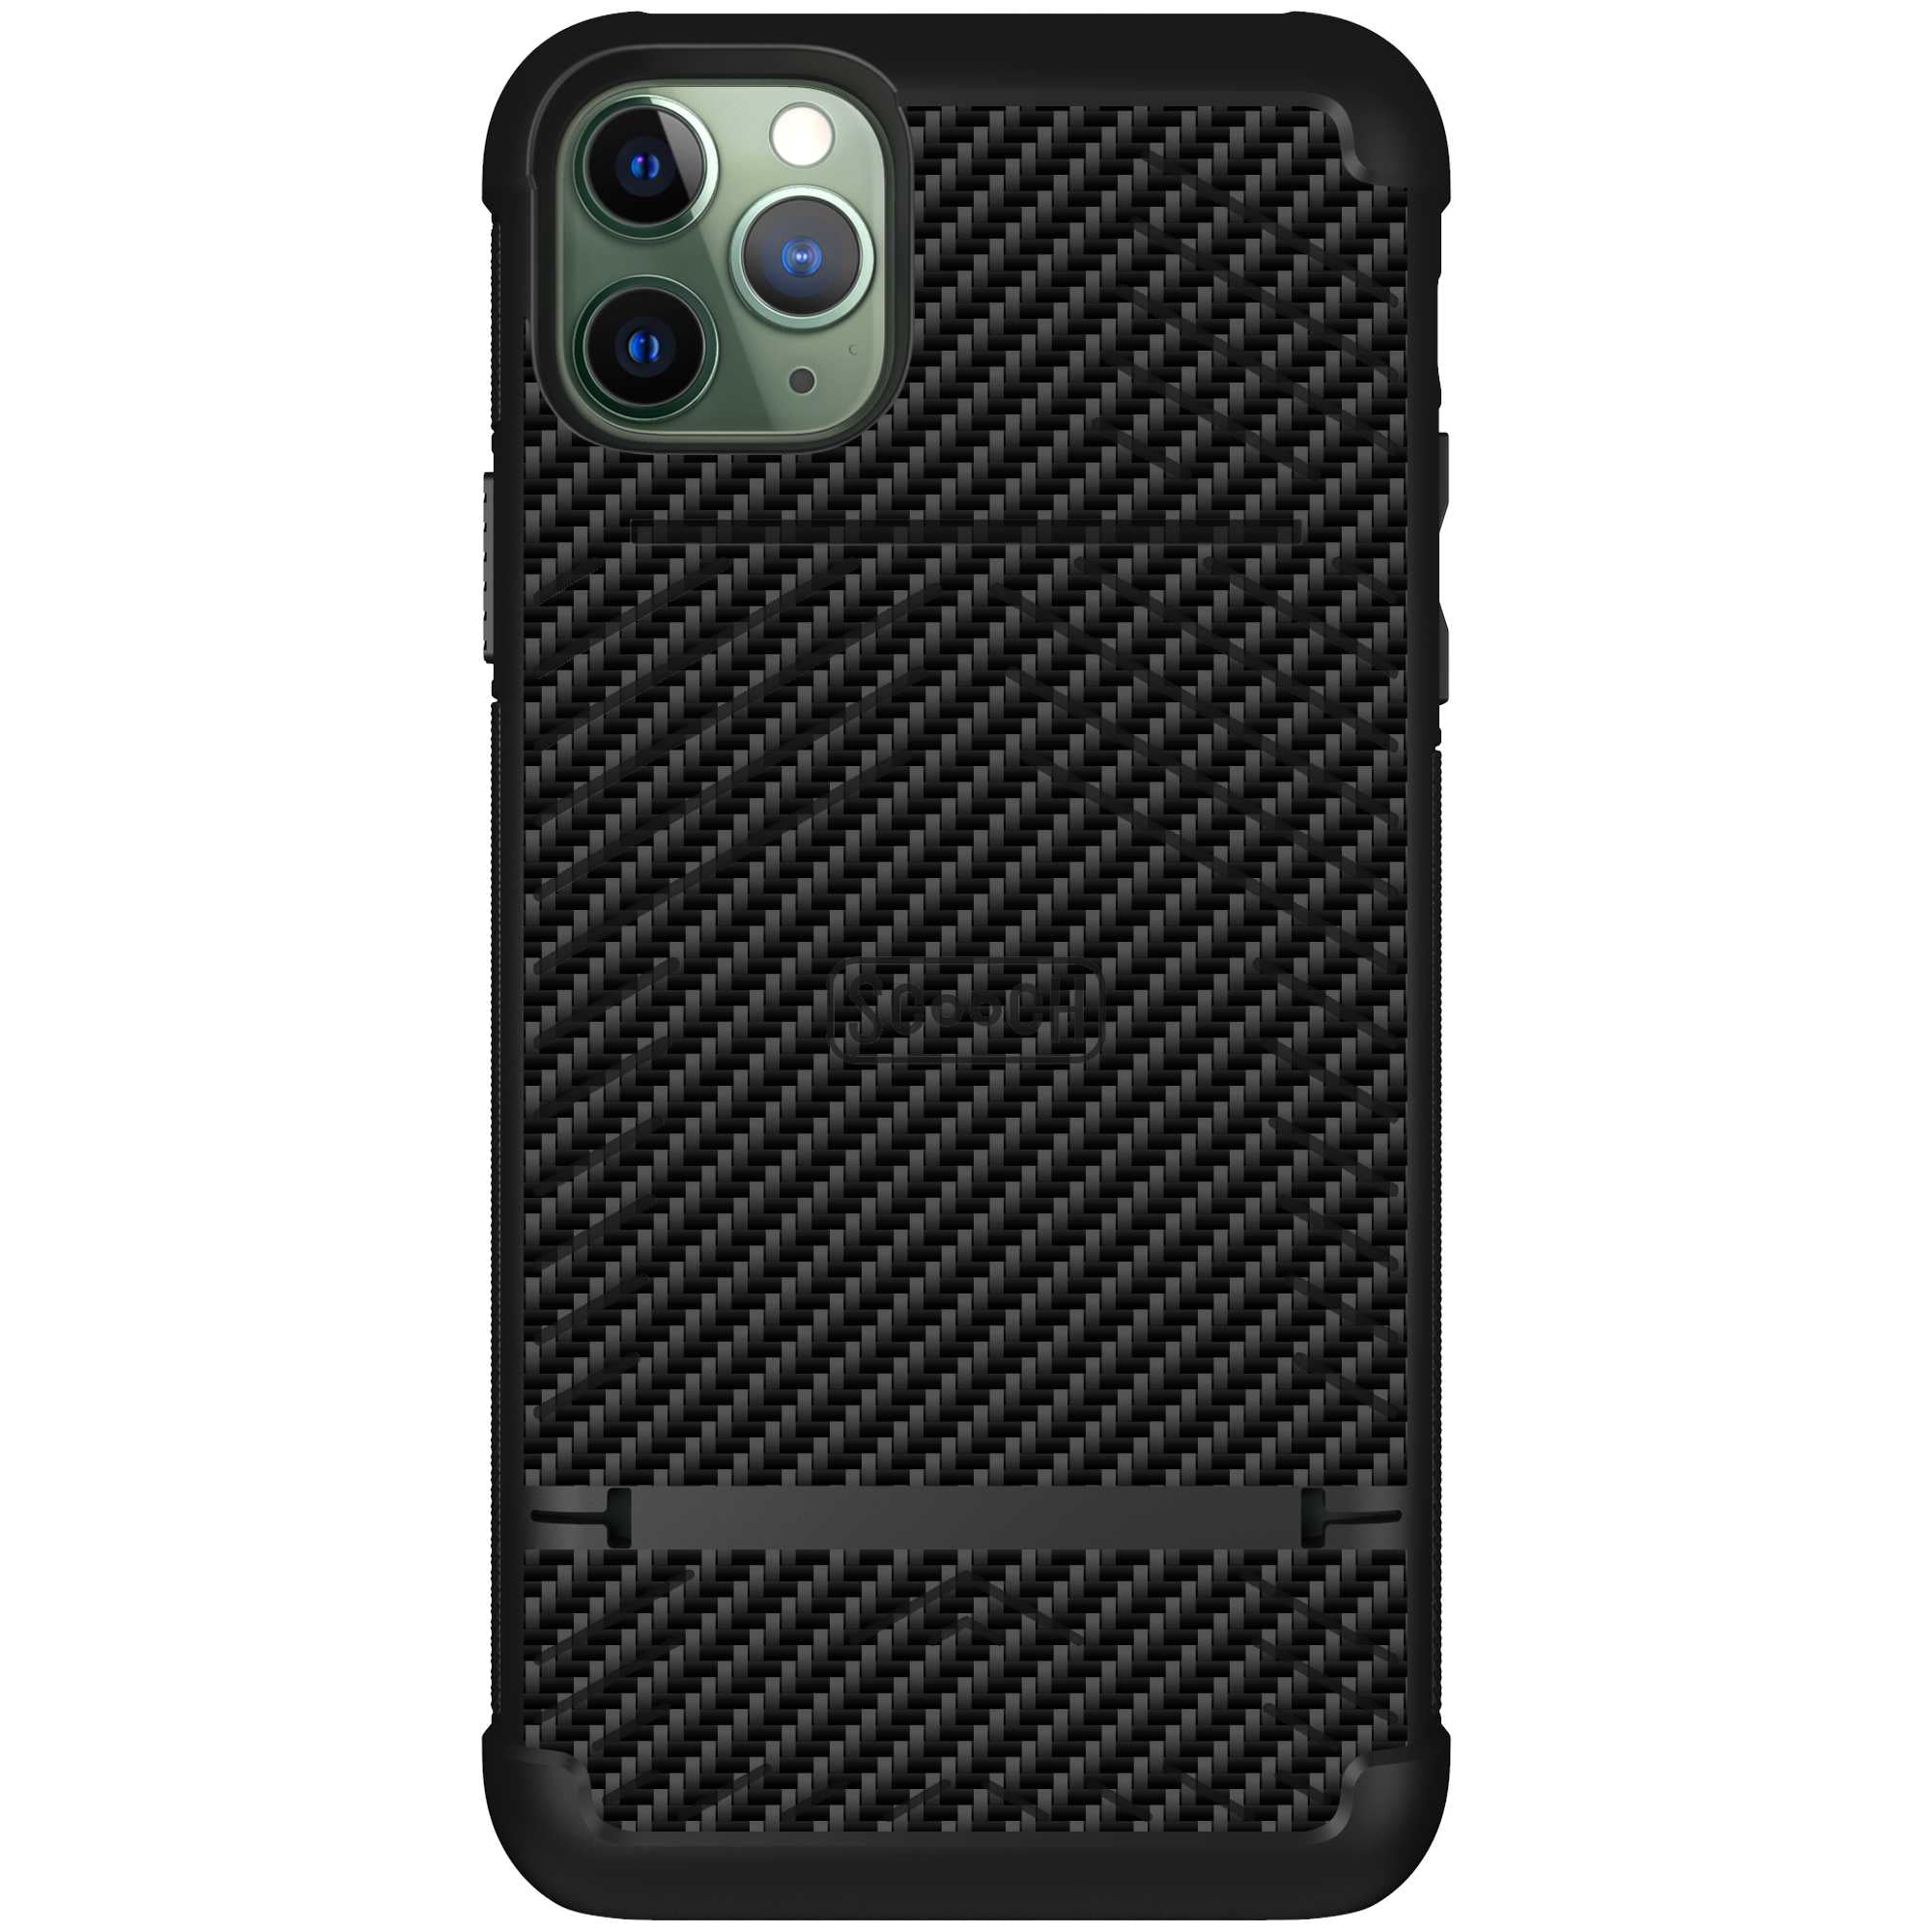 Scooch-Wingmate for iPhone 11 Pro Max-CarbonFiber